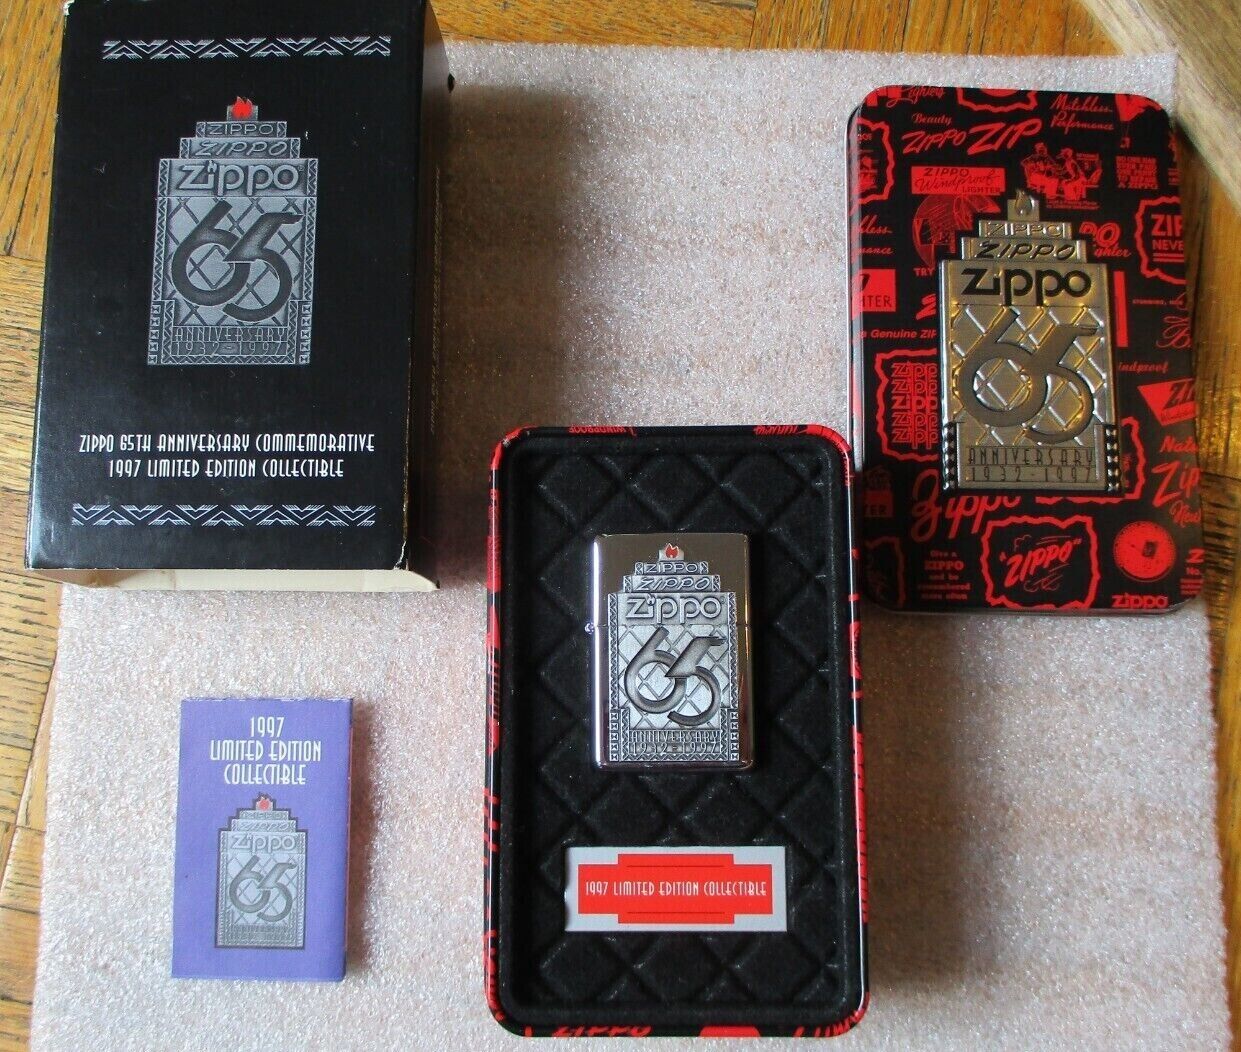 1997 ZIPPO UNSTRUCK 65th ANNIVERSRY COMMEMORATIVE LIMITED EDITION W/ TIN- SLEEVE